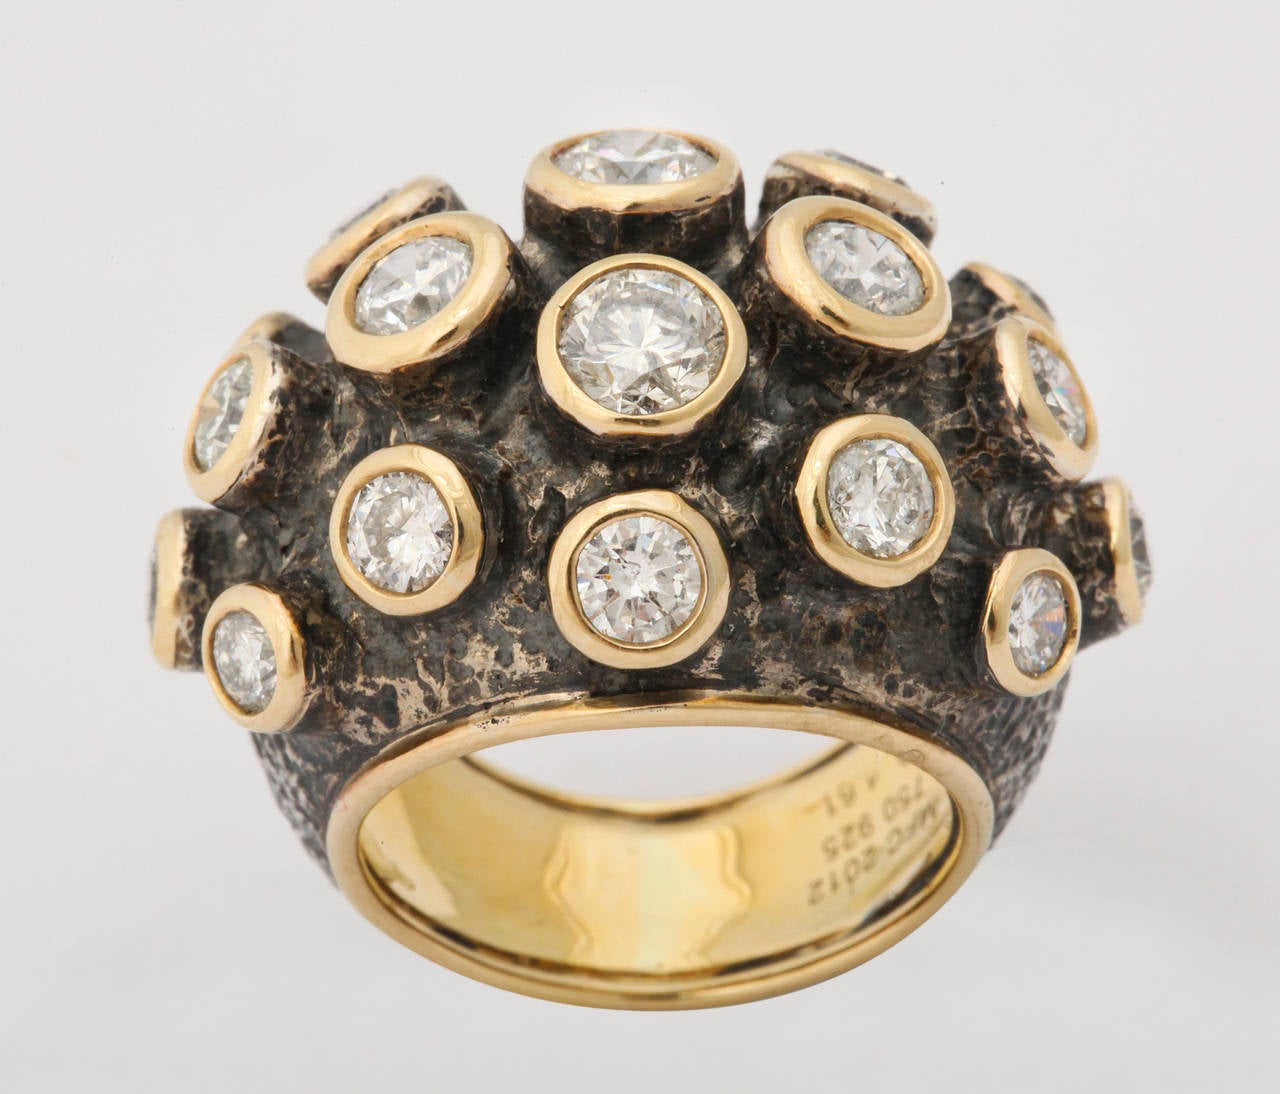 A bold design by Marilyn Cooperman featuring 4.61cts of round, white diamonds.  Each stone is individually bezel set in 18kt yellow gold and these bezels are in turn mounted on the patinated silver and 18kt gold ring.  One of a kind, size